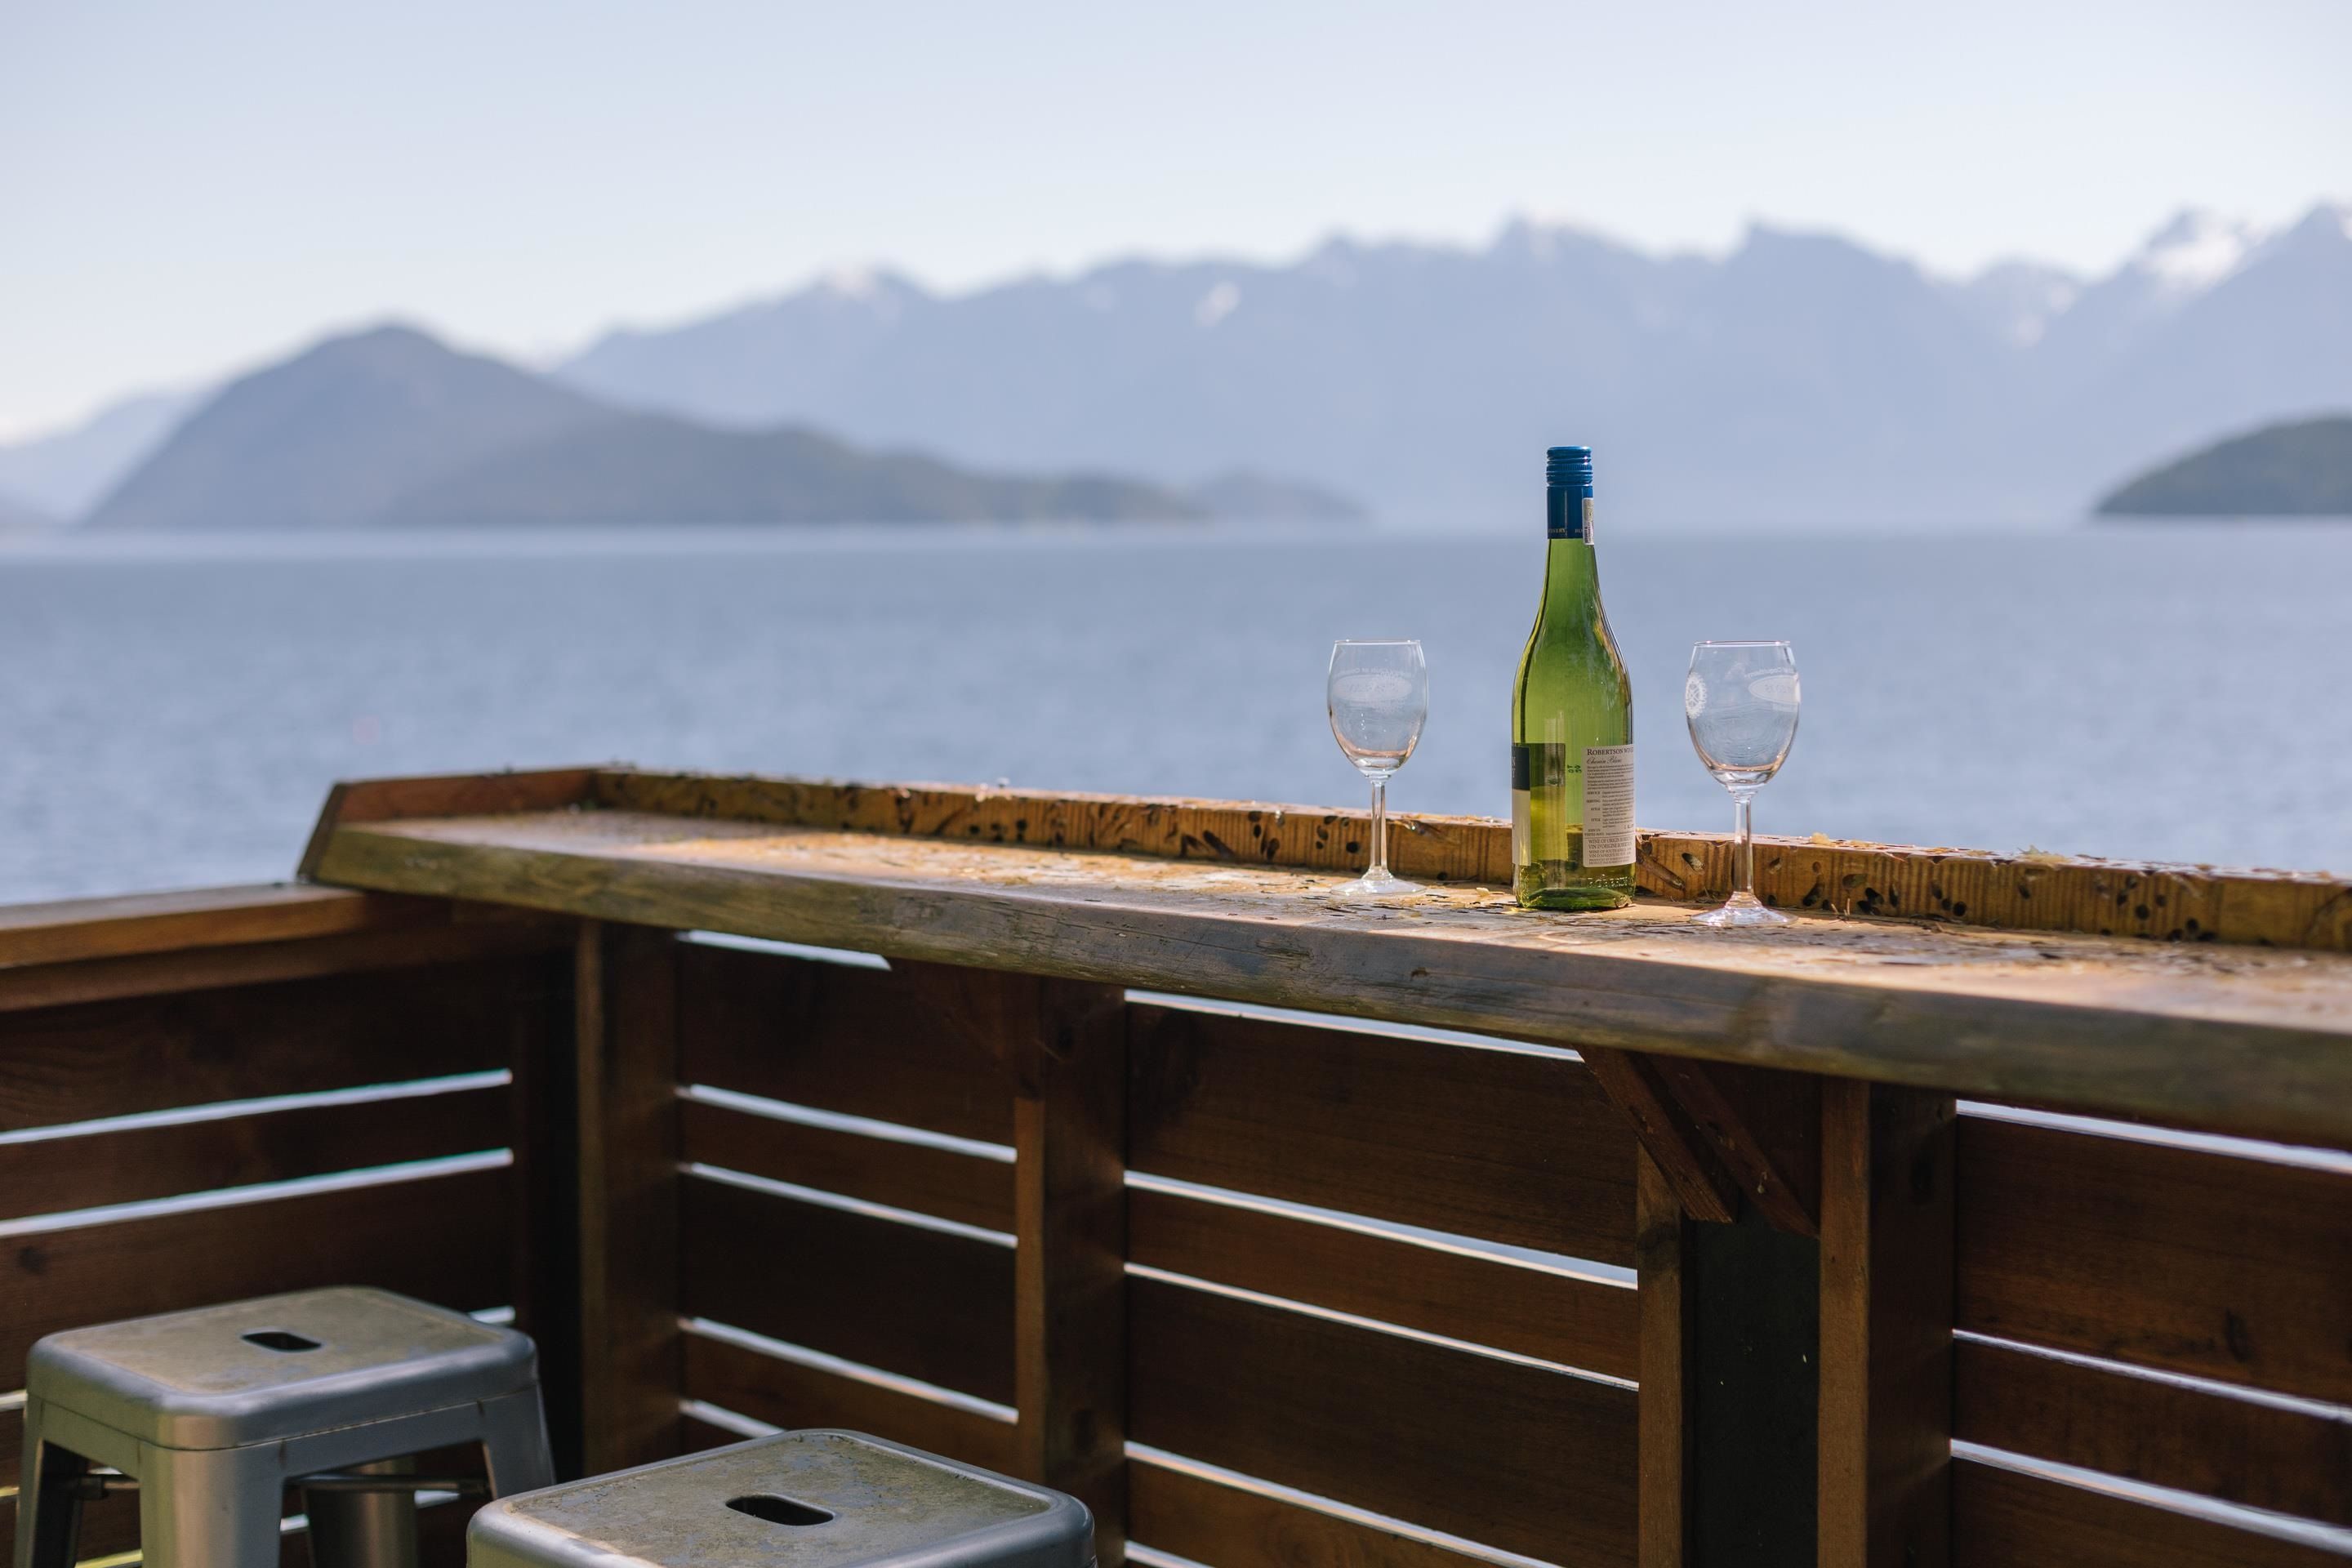 Watch Whales and Eagles and Boats go by while sipping a cold beverage